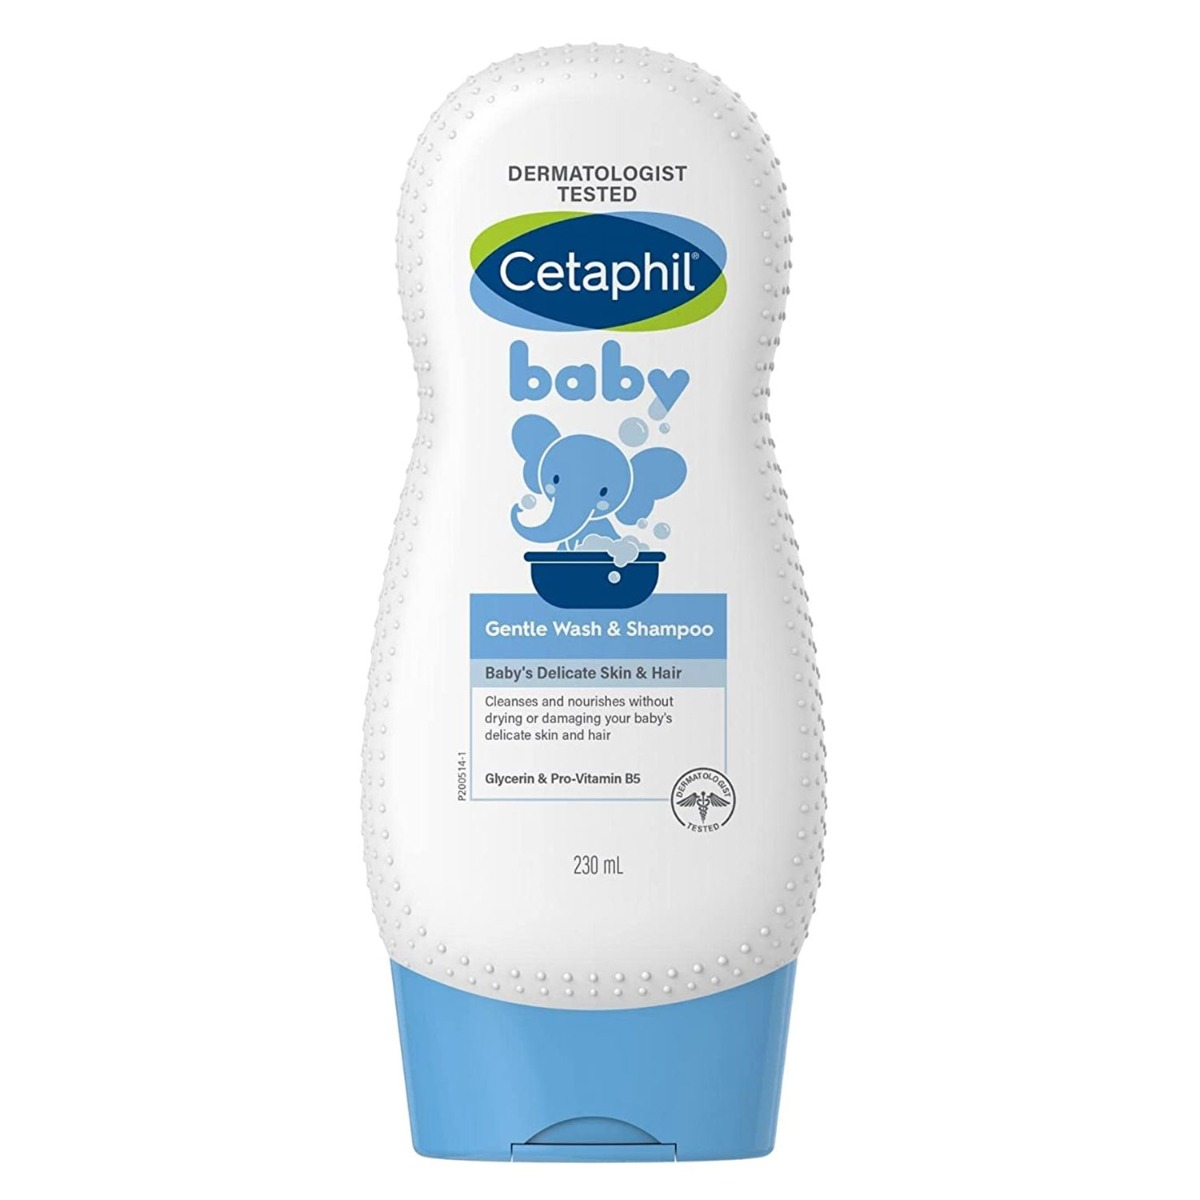 Cetaphil Baby gentle wash & shampoo For Baby's Delicate Skin & Hair, 230ml